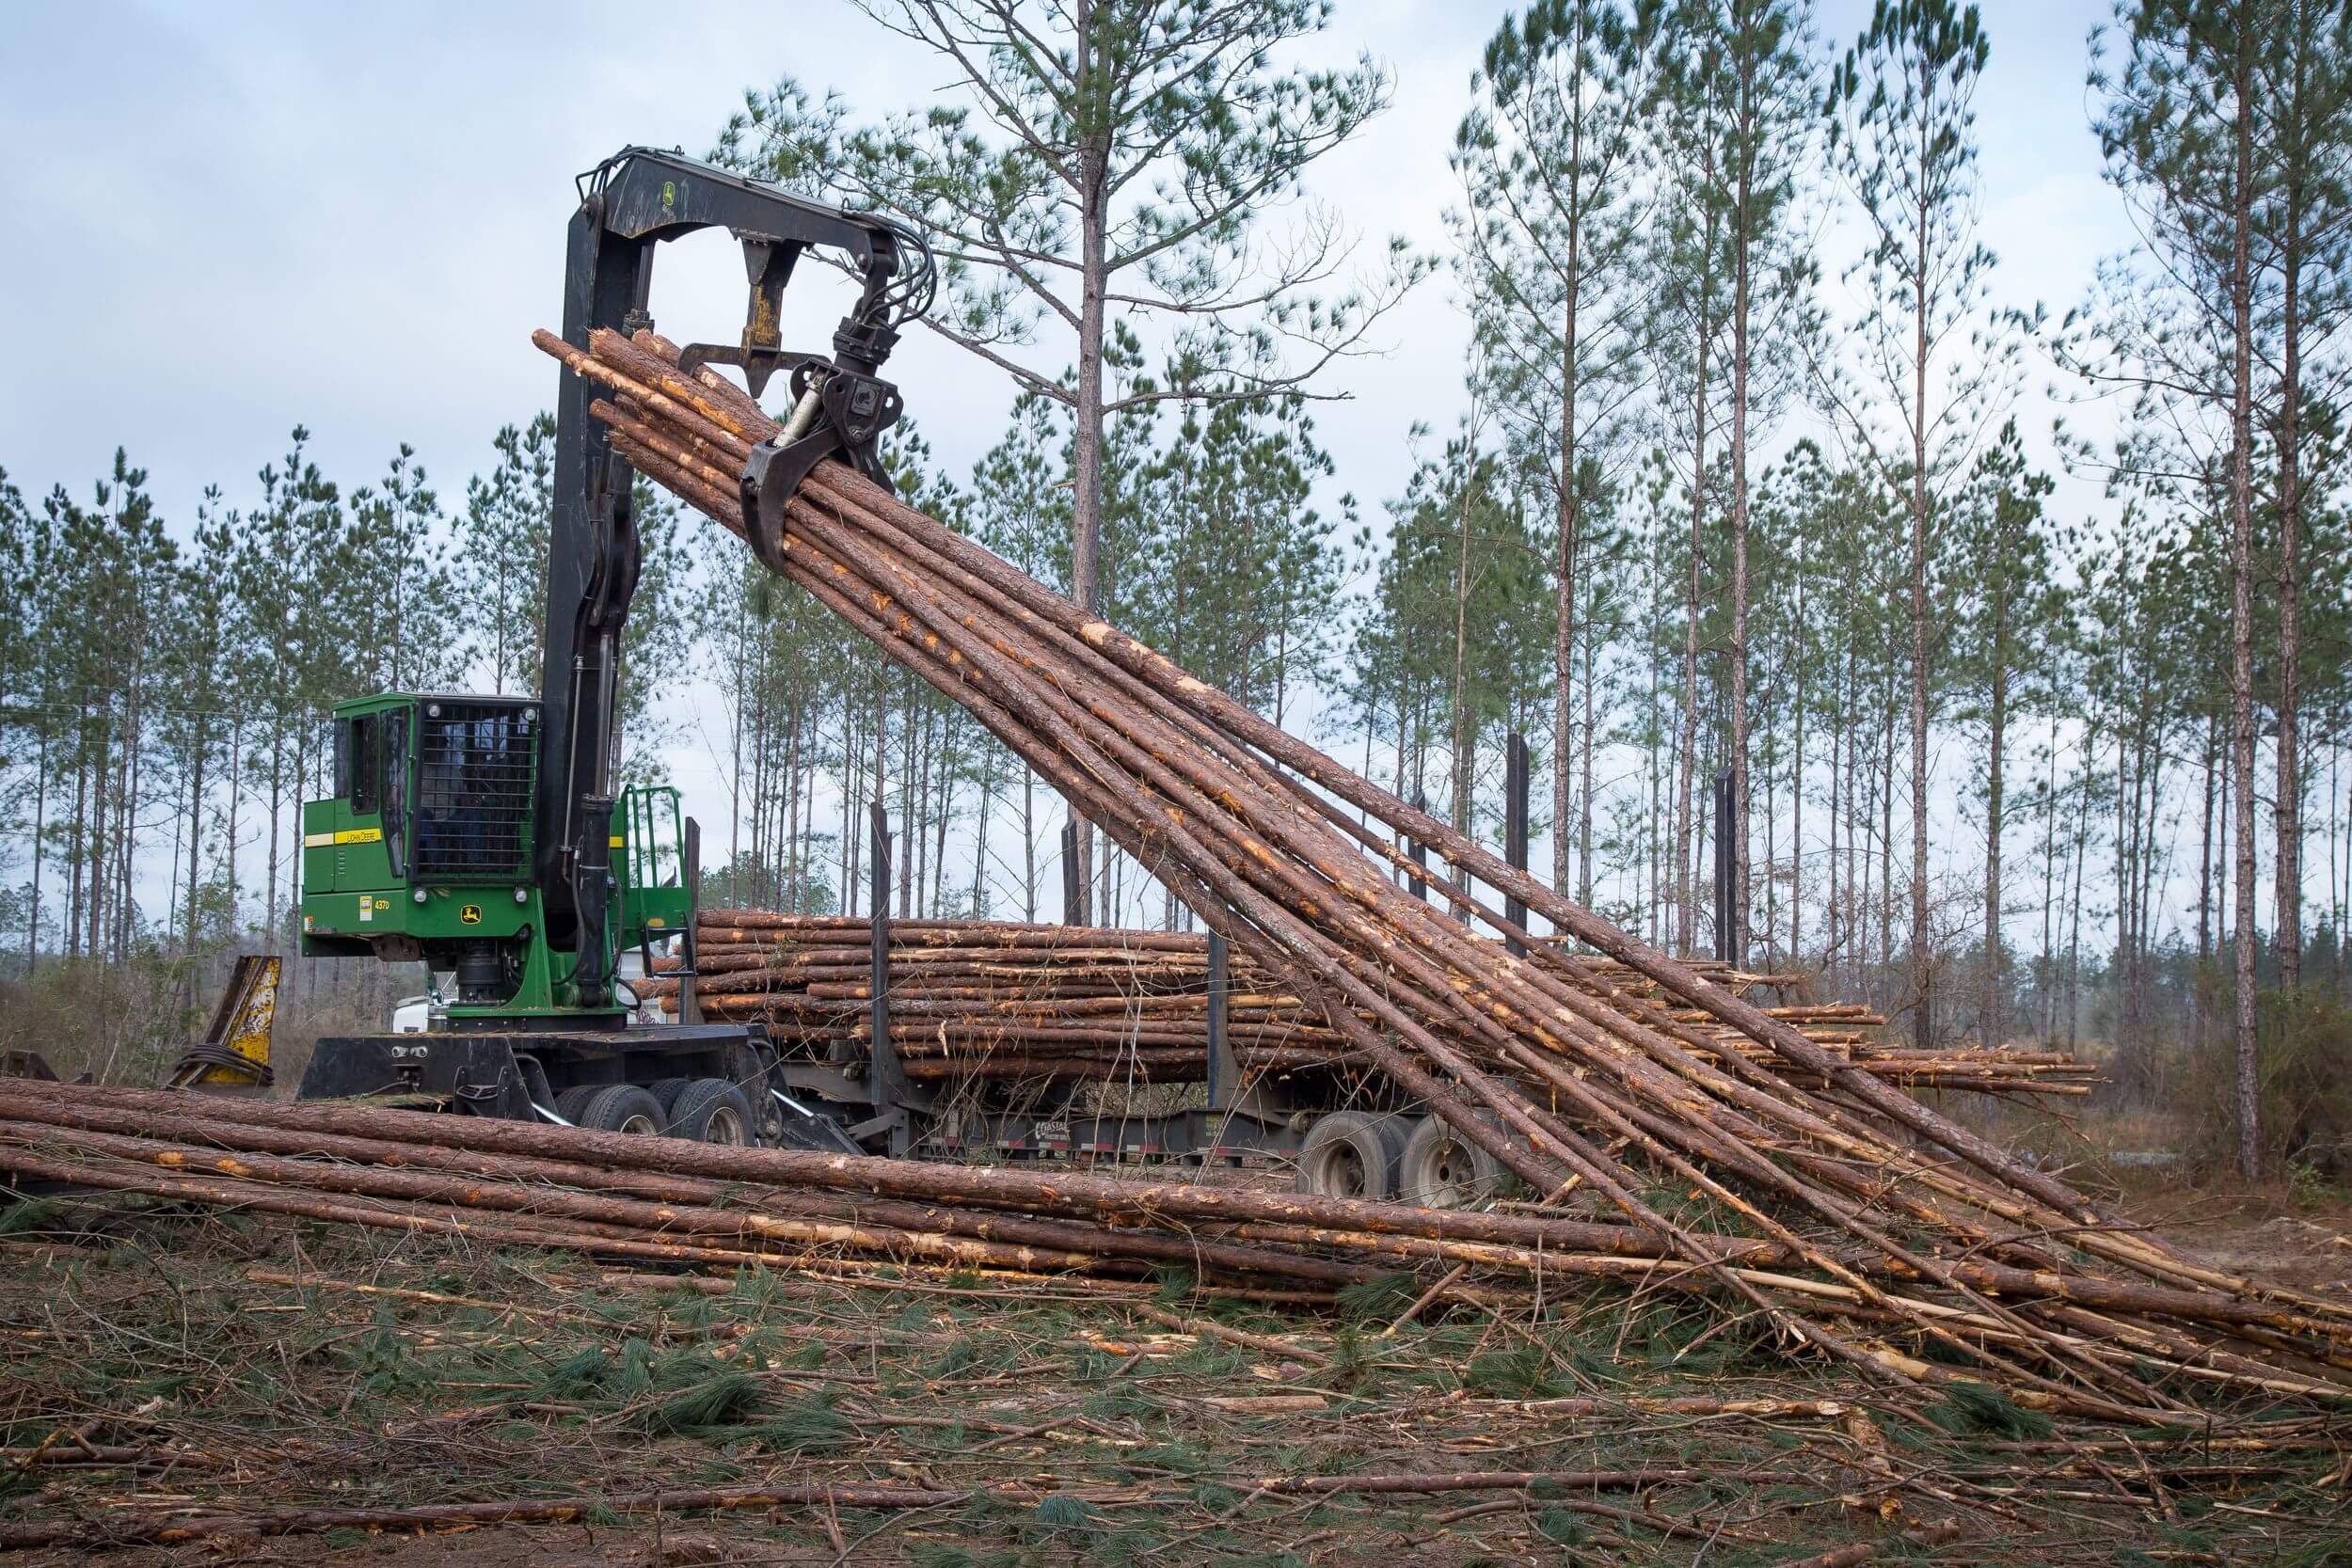 Piles of timber are moved by a logging machine.